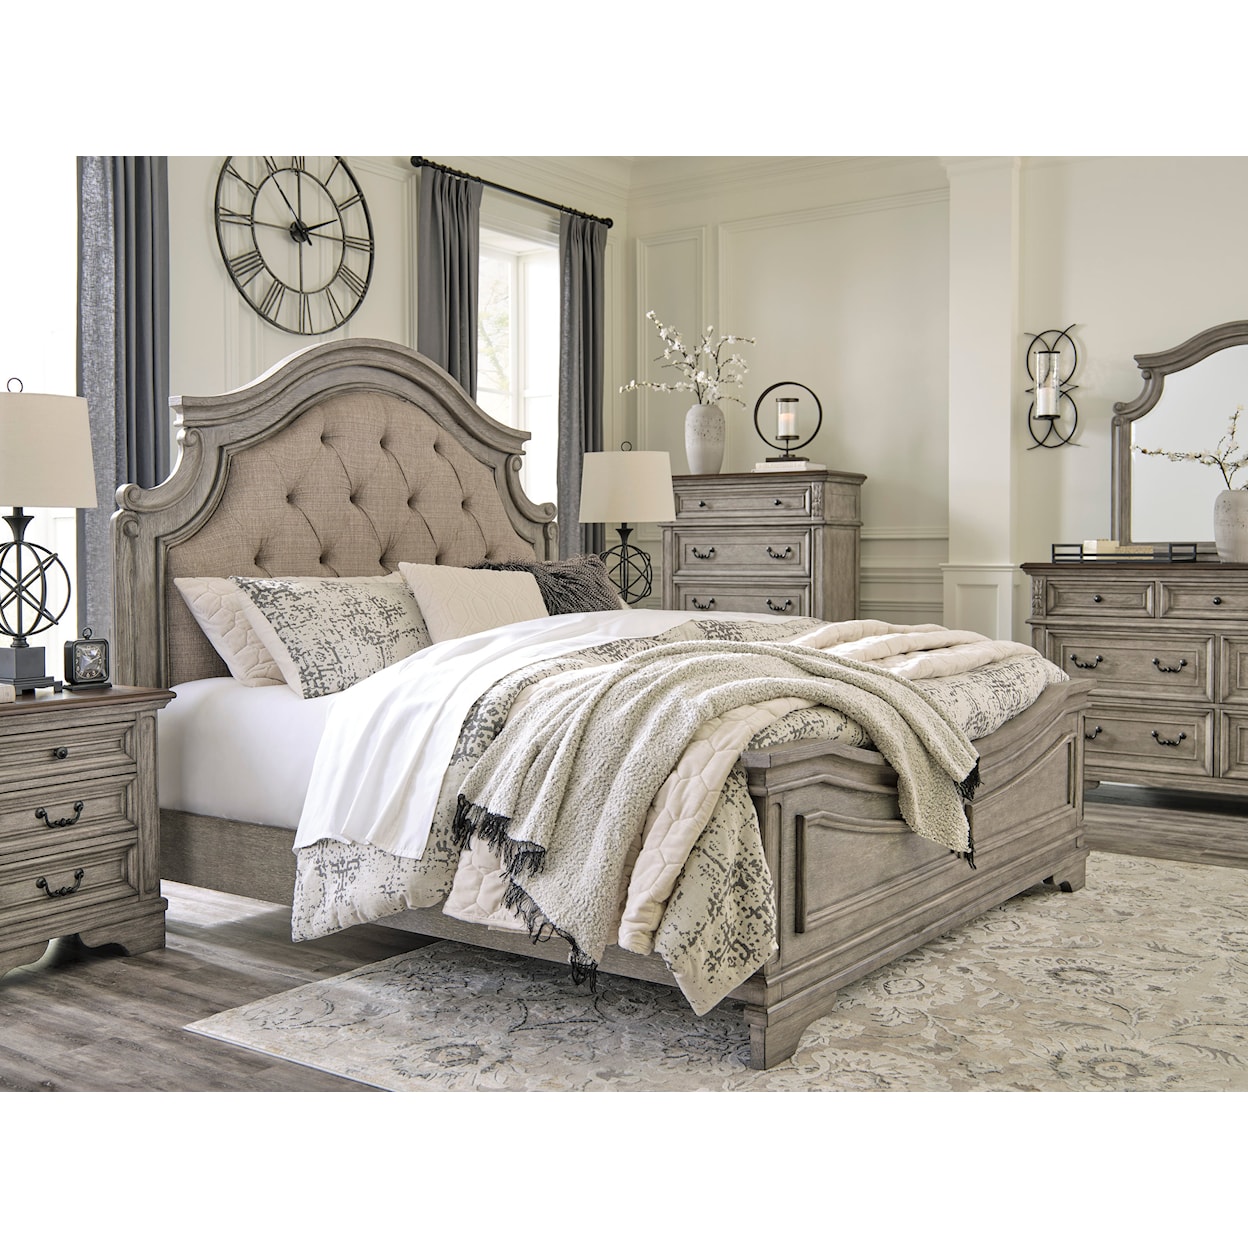 Signature Design by Ashley Lodenbay 5 Piece Queen Bedroom Set